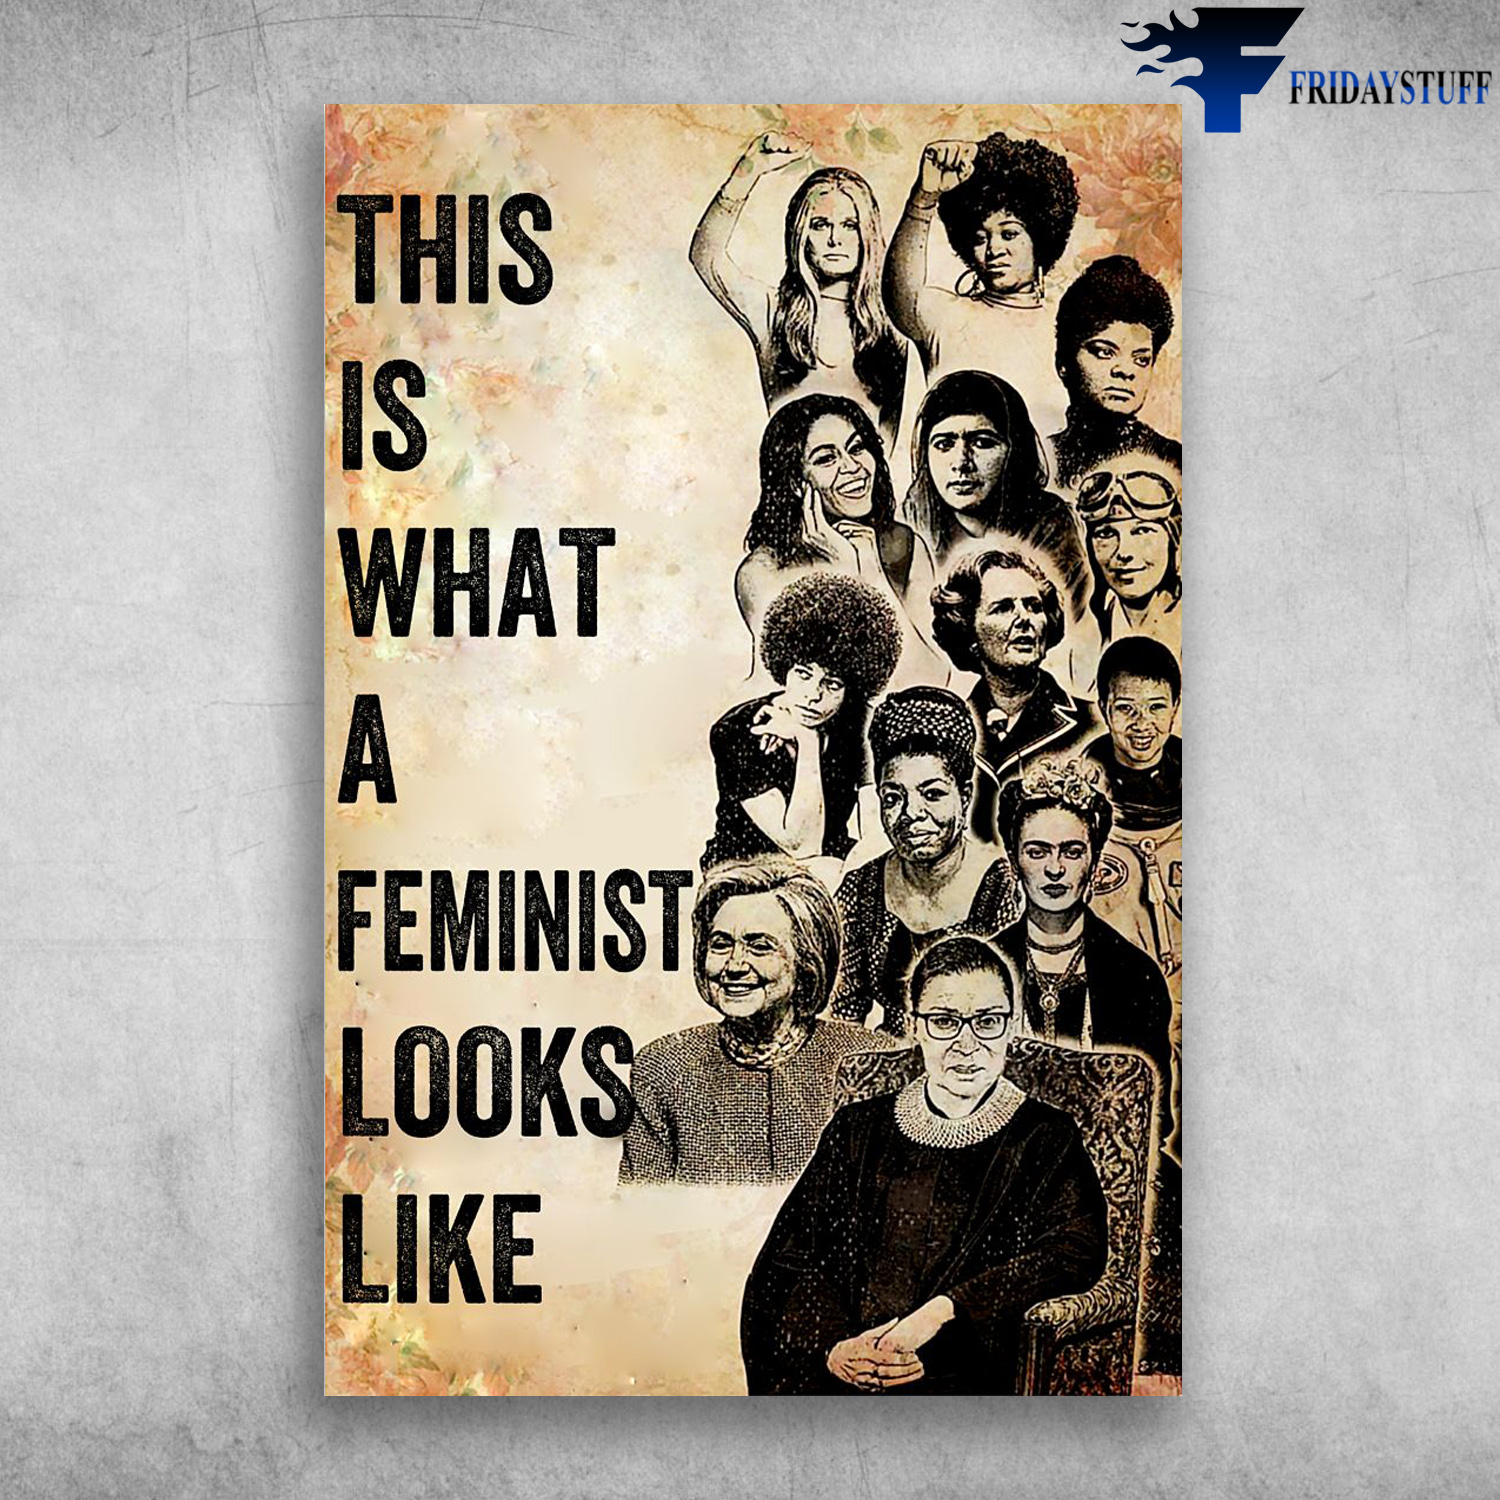 The Feminist - This Is What A Feminist Looks Like, Ruth Bader Ginsburg, Hillary Clinton, Frida Kahlo